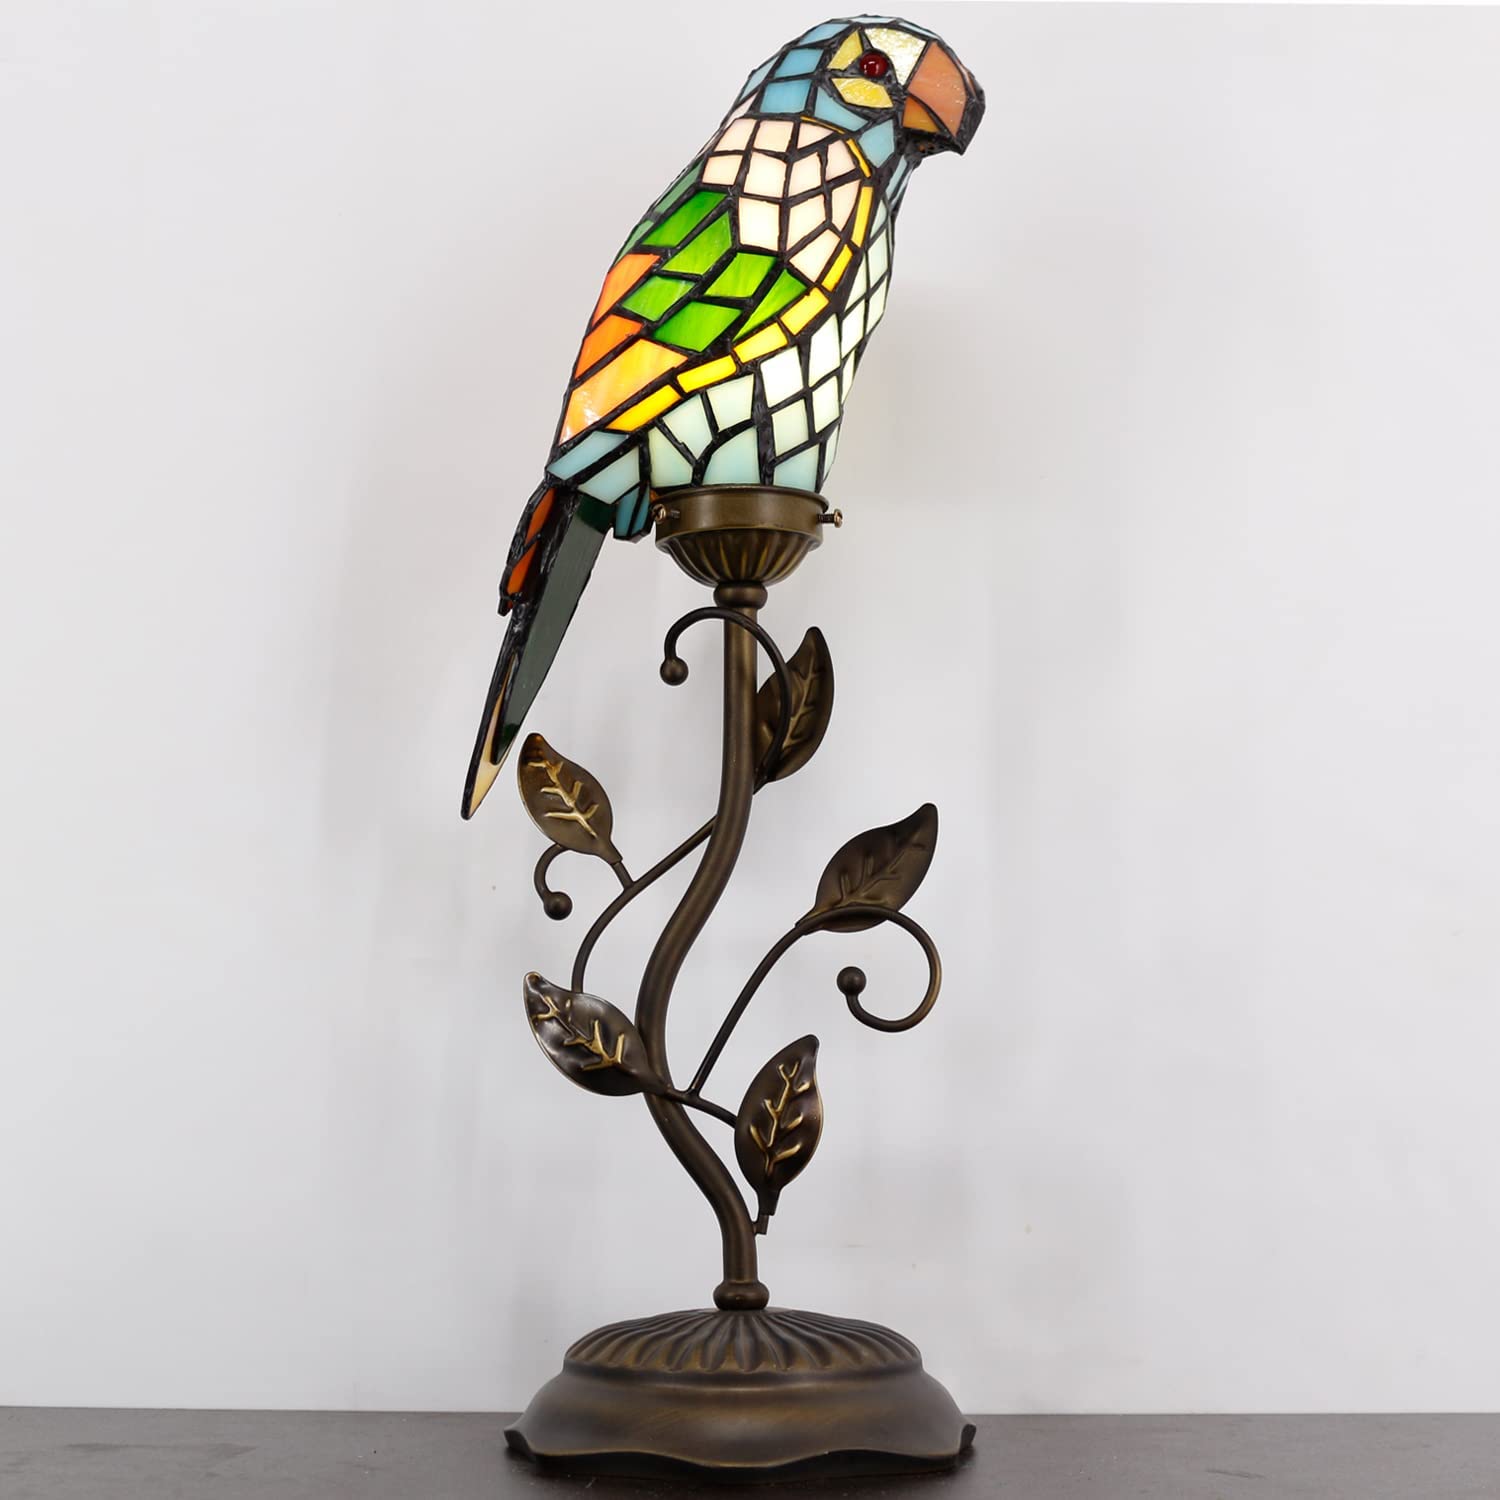 Tiffany Parrot Lamp Handmade Colorful Stained Glass Birds Reading Light